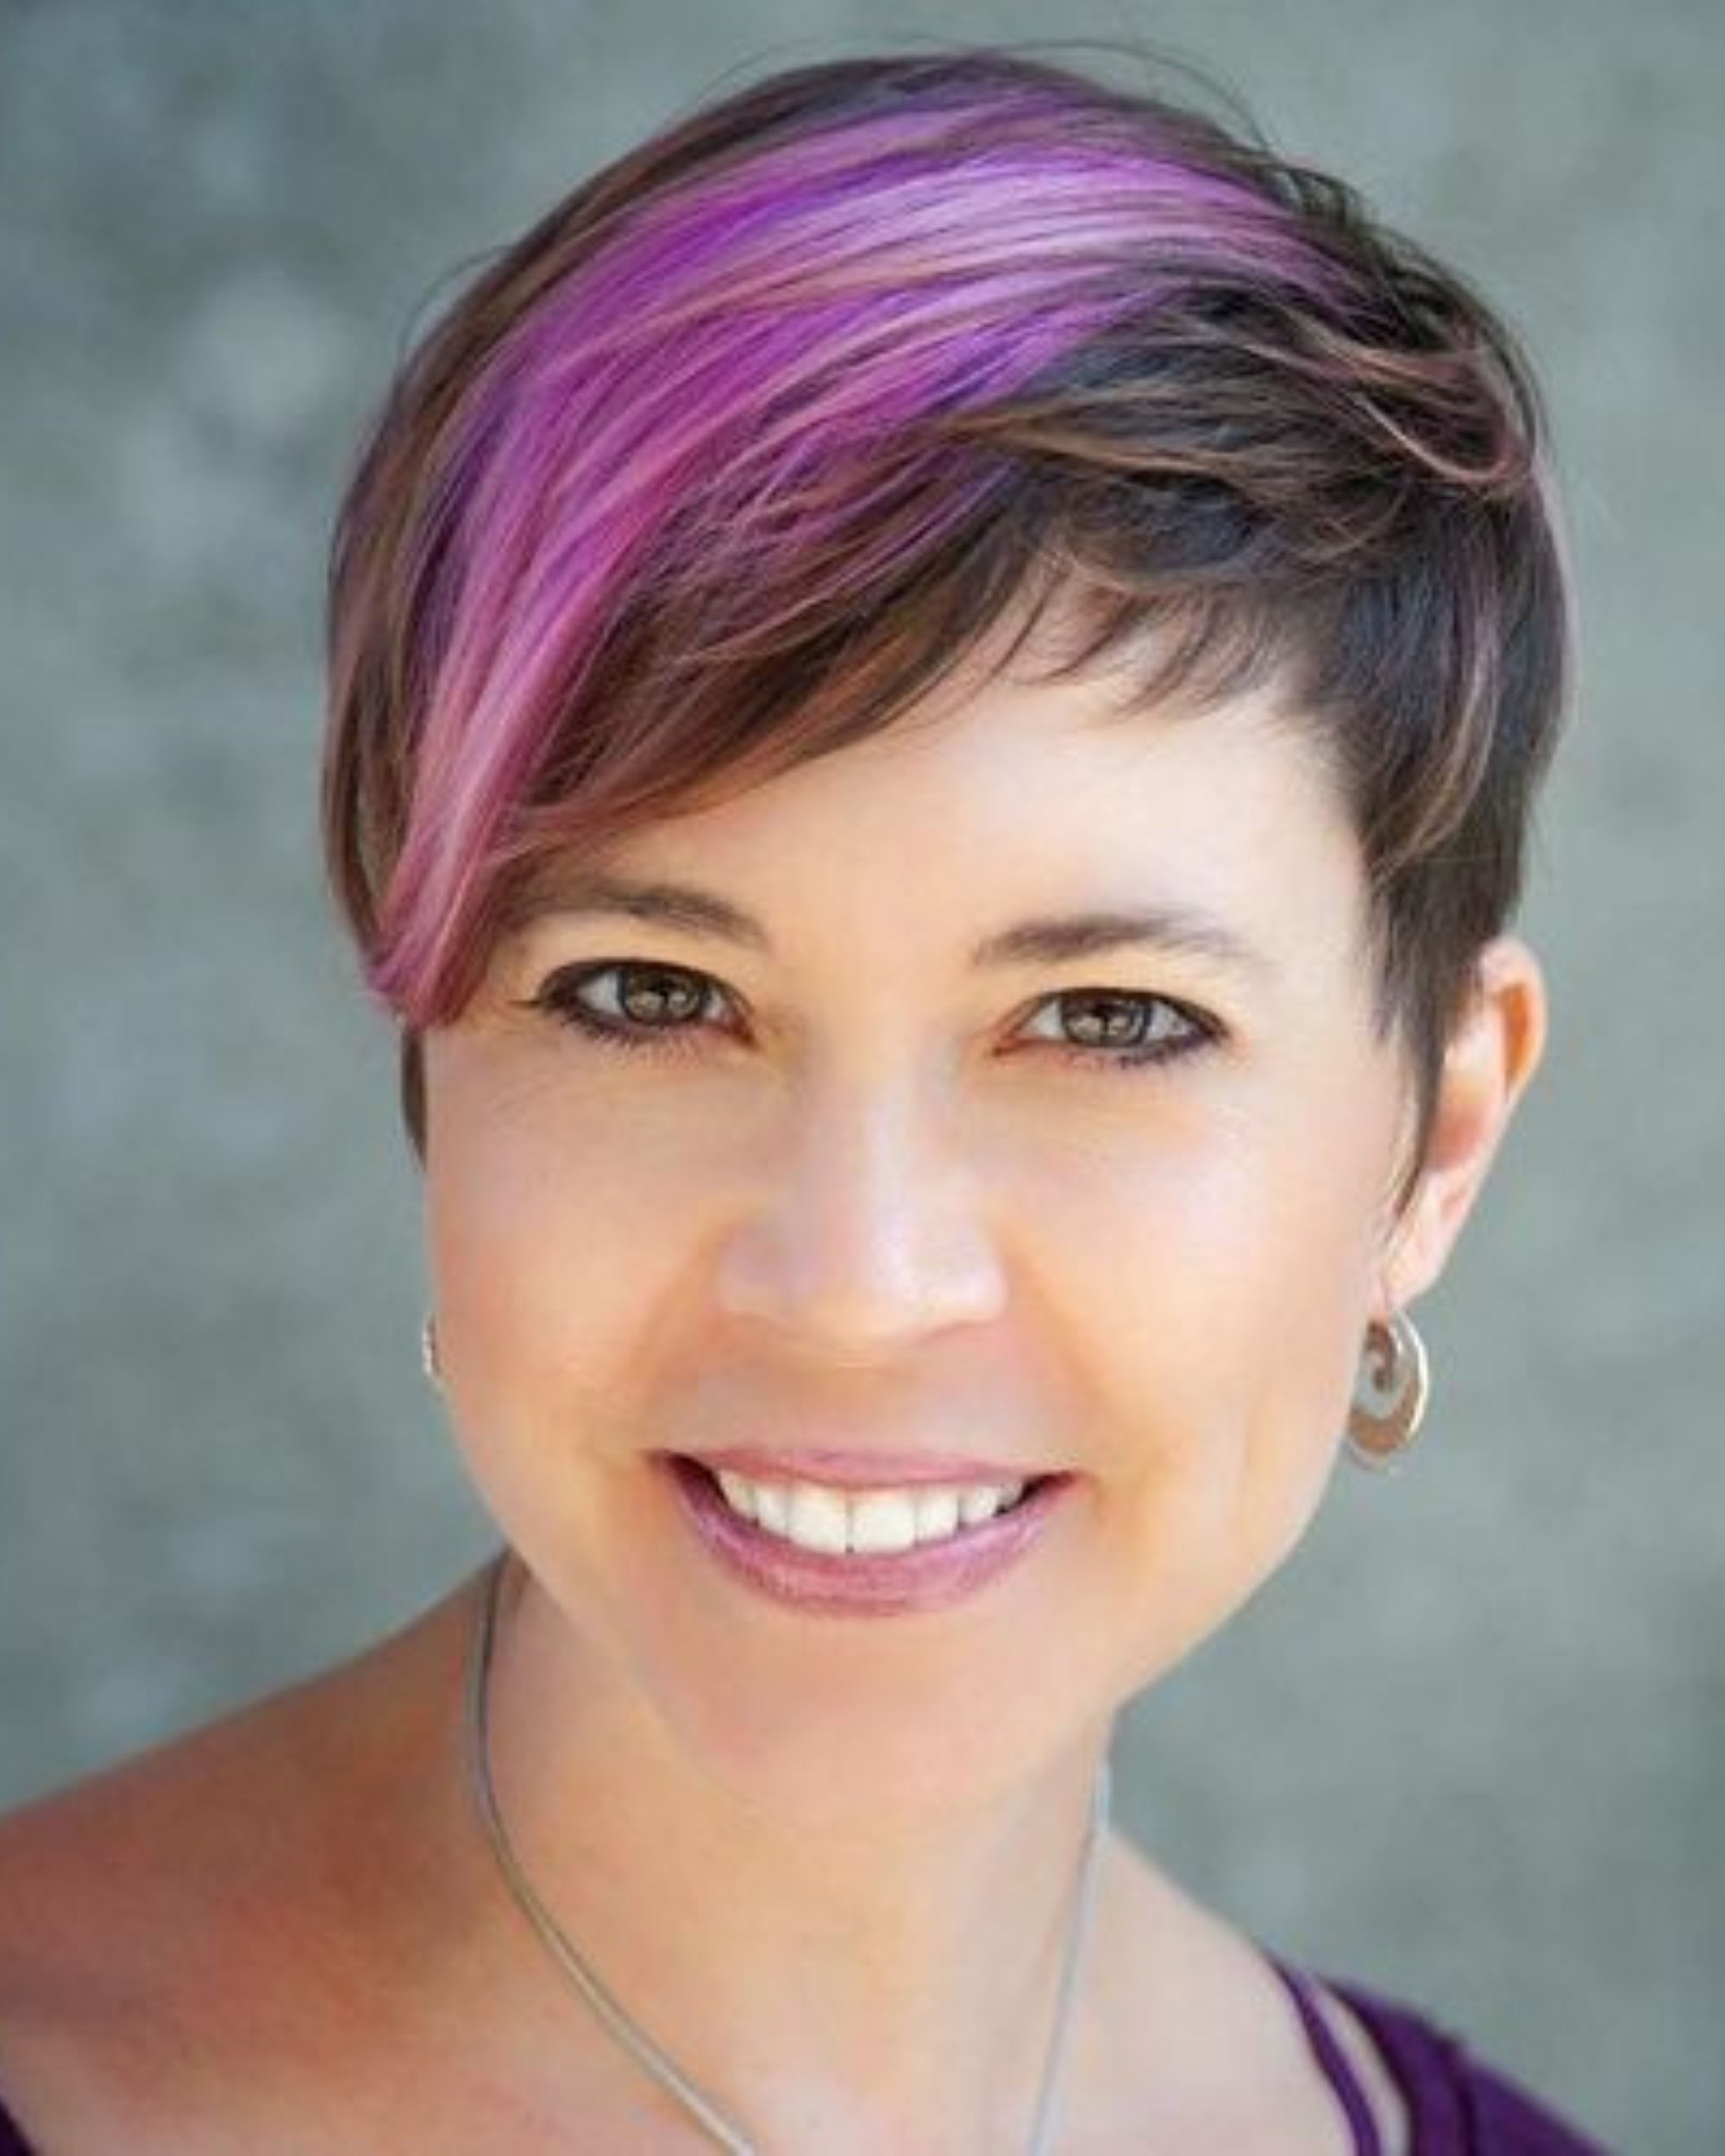 chubby face double chin pixie cut short hairstyles